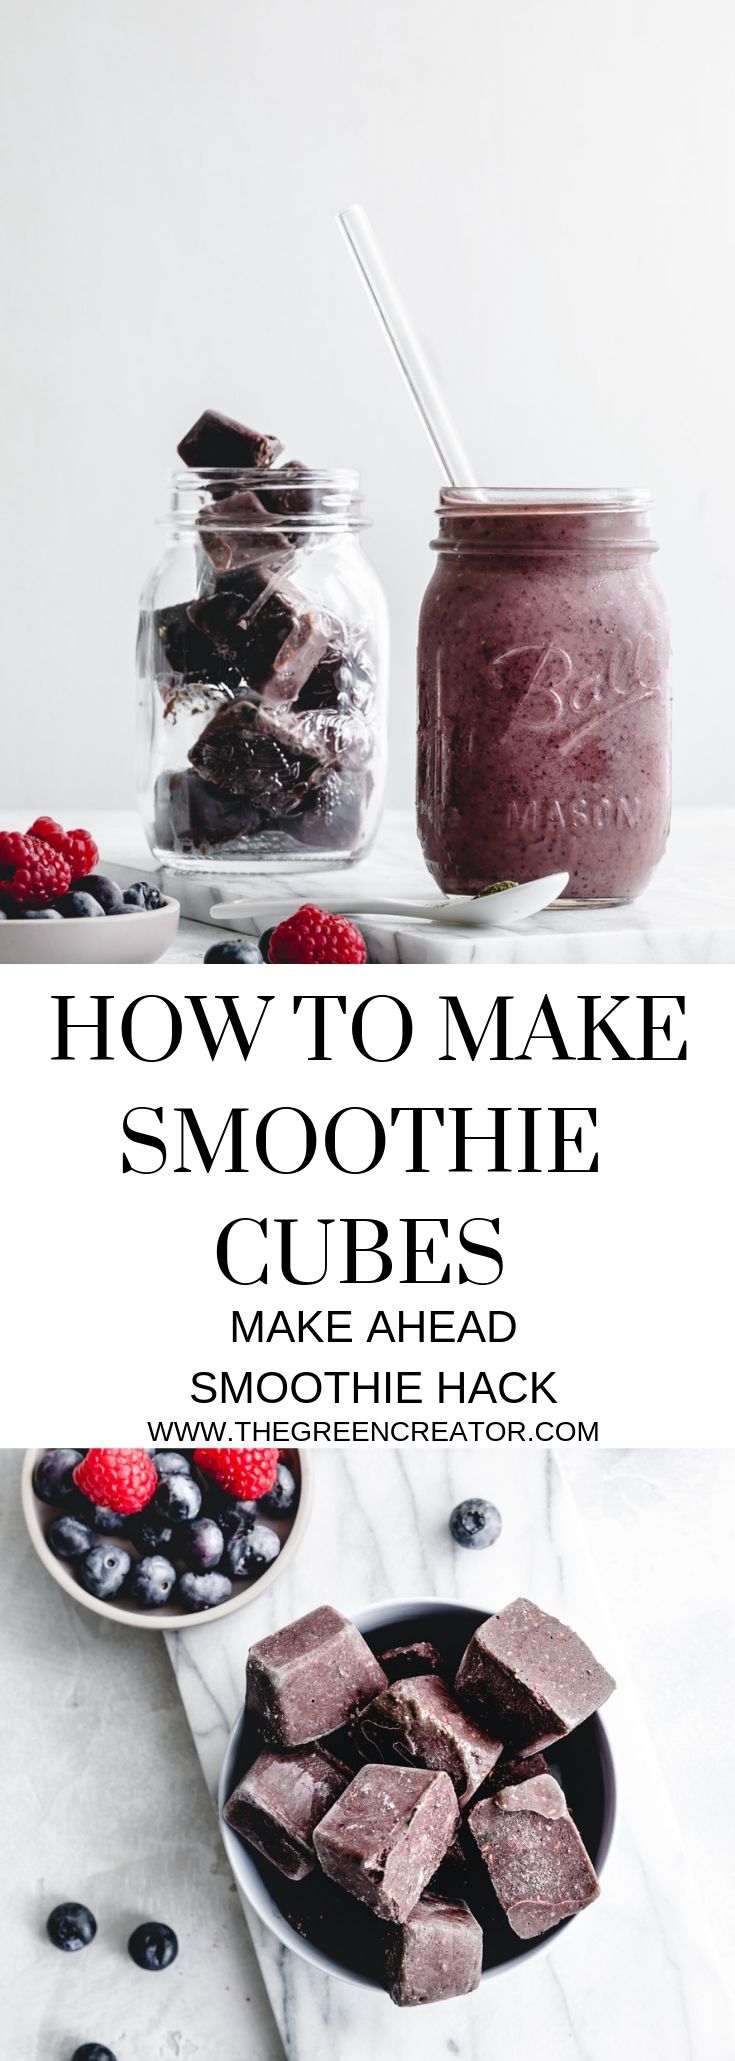 smoothie cubes for Pinterest